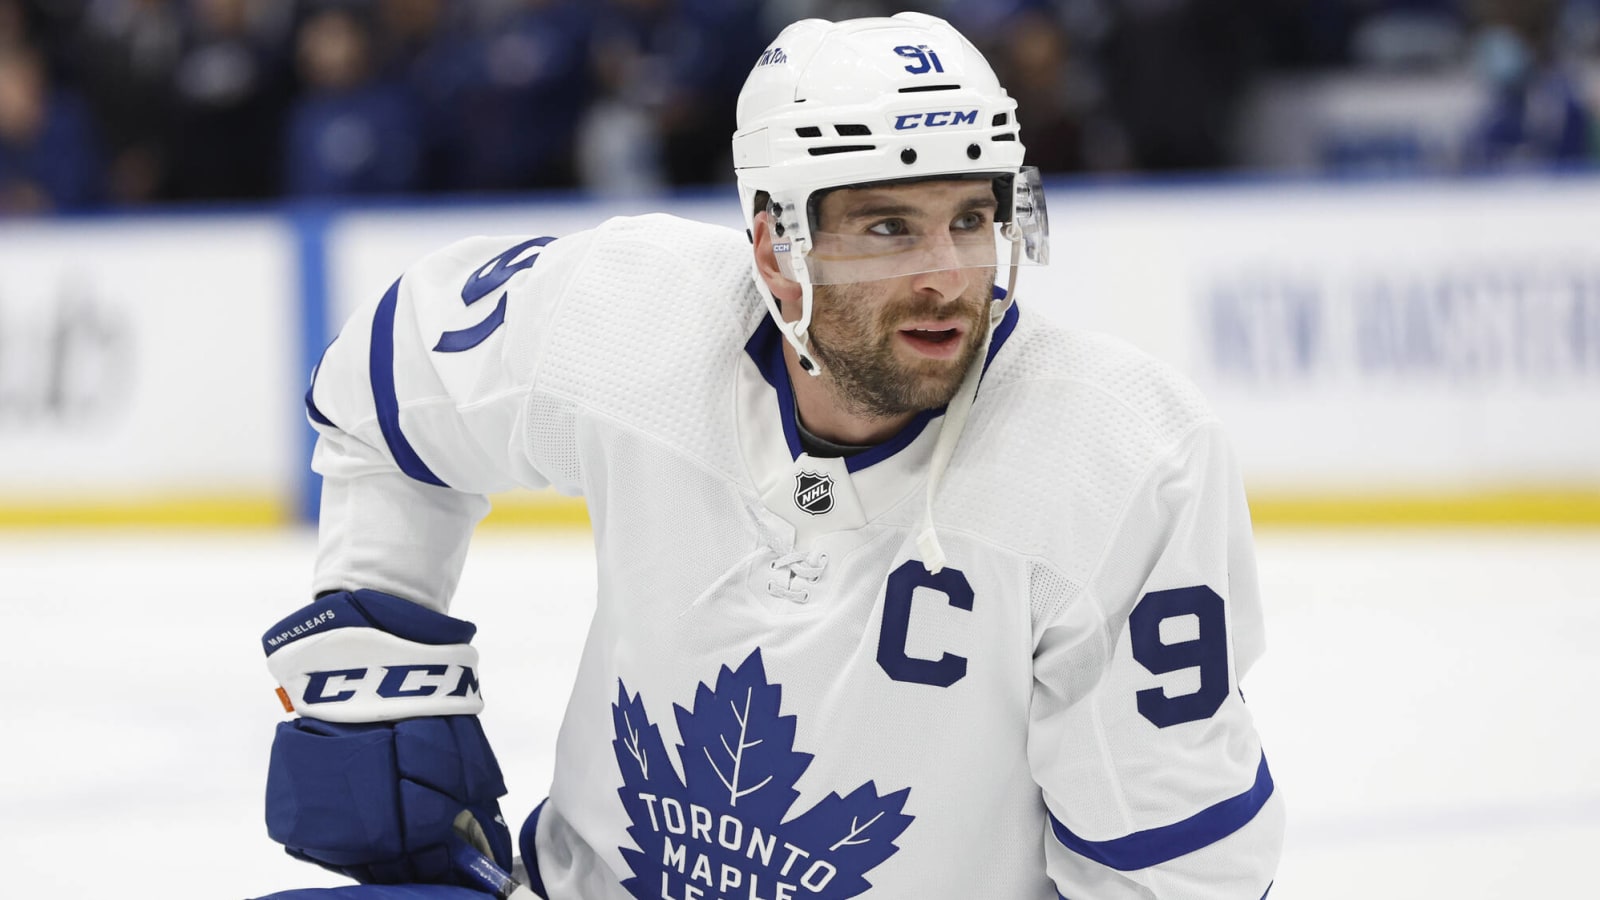 Leafs' John Tavares expected to be ready for season opener